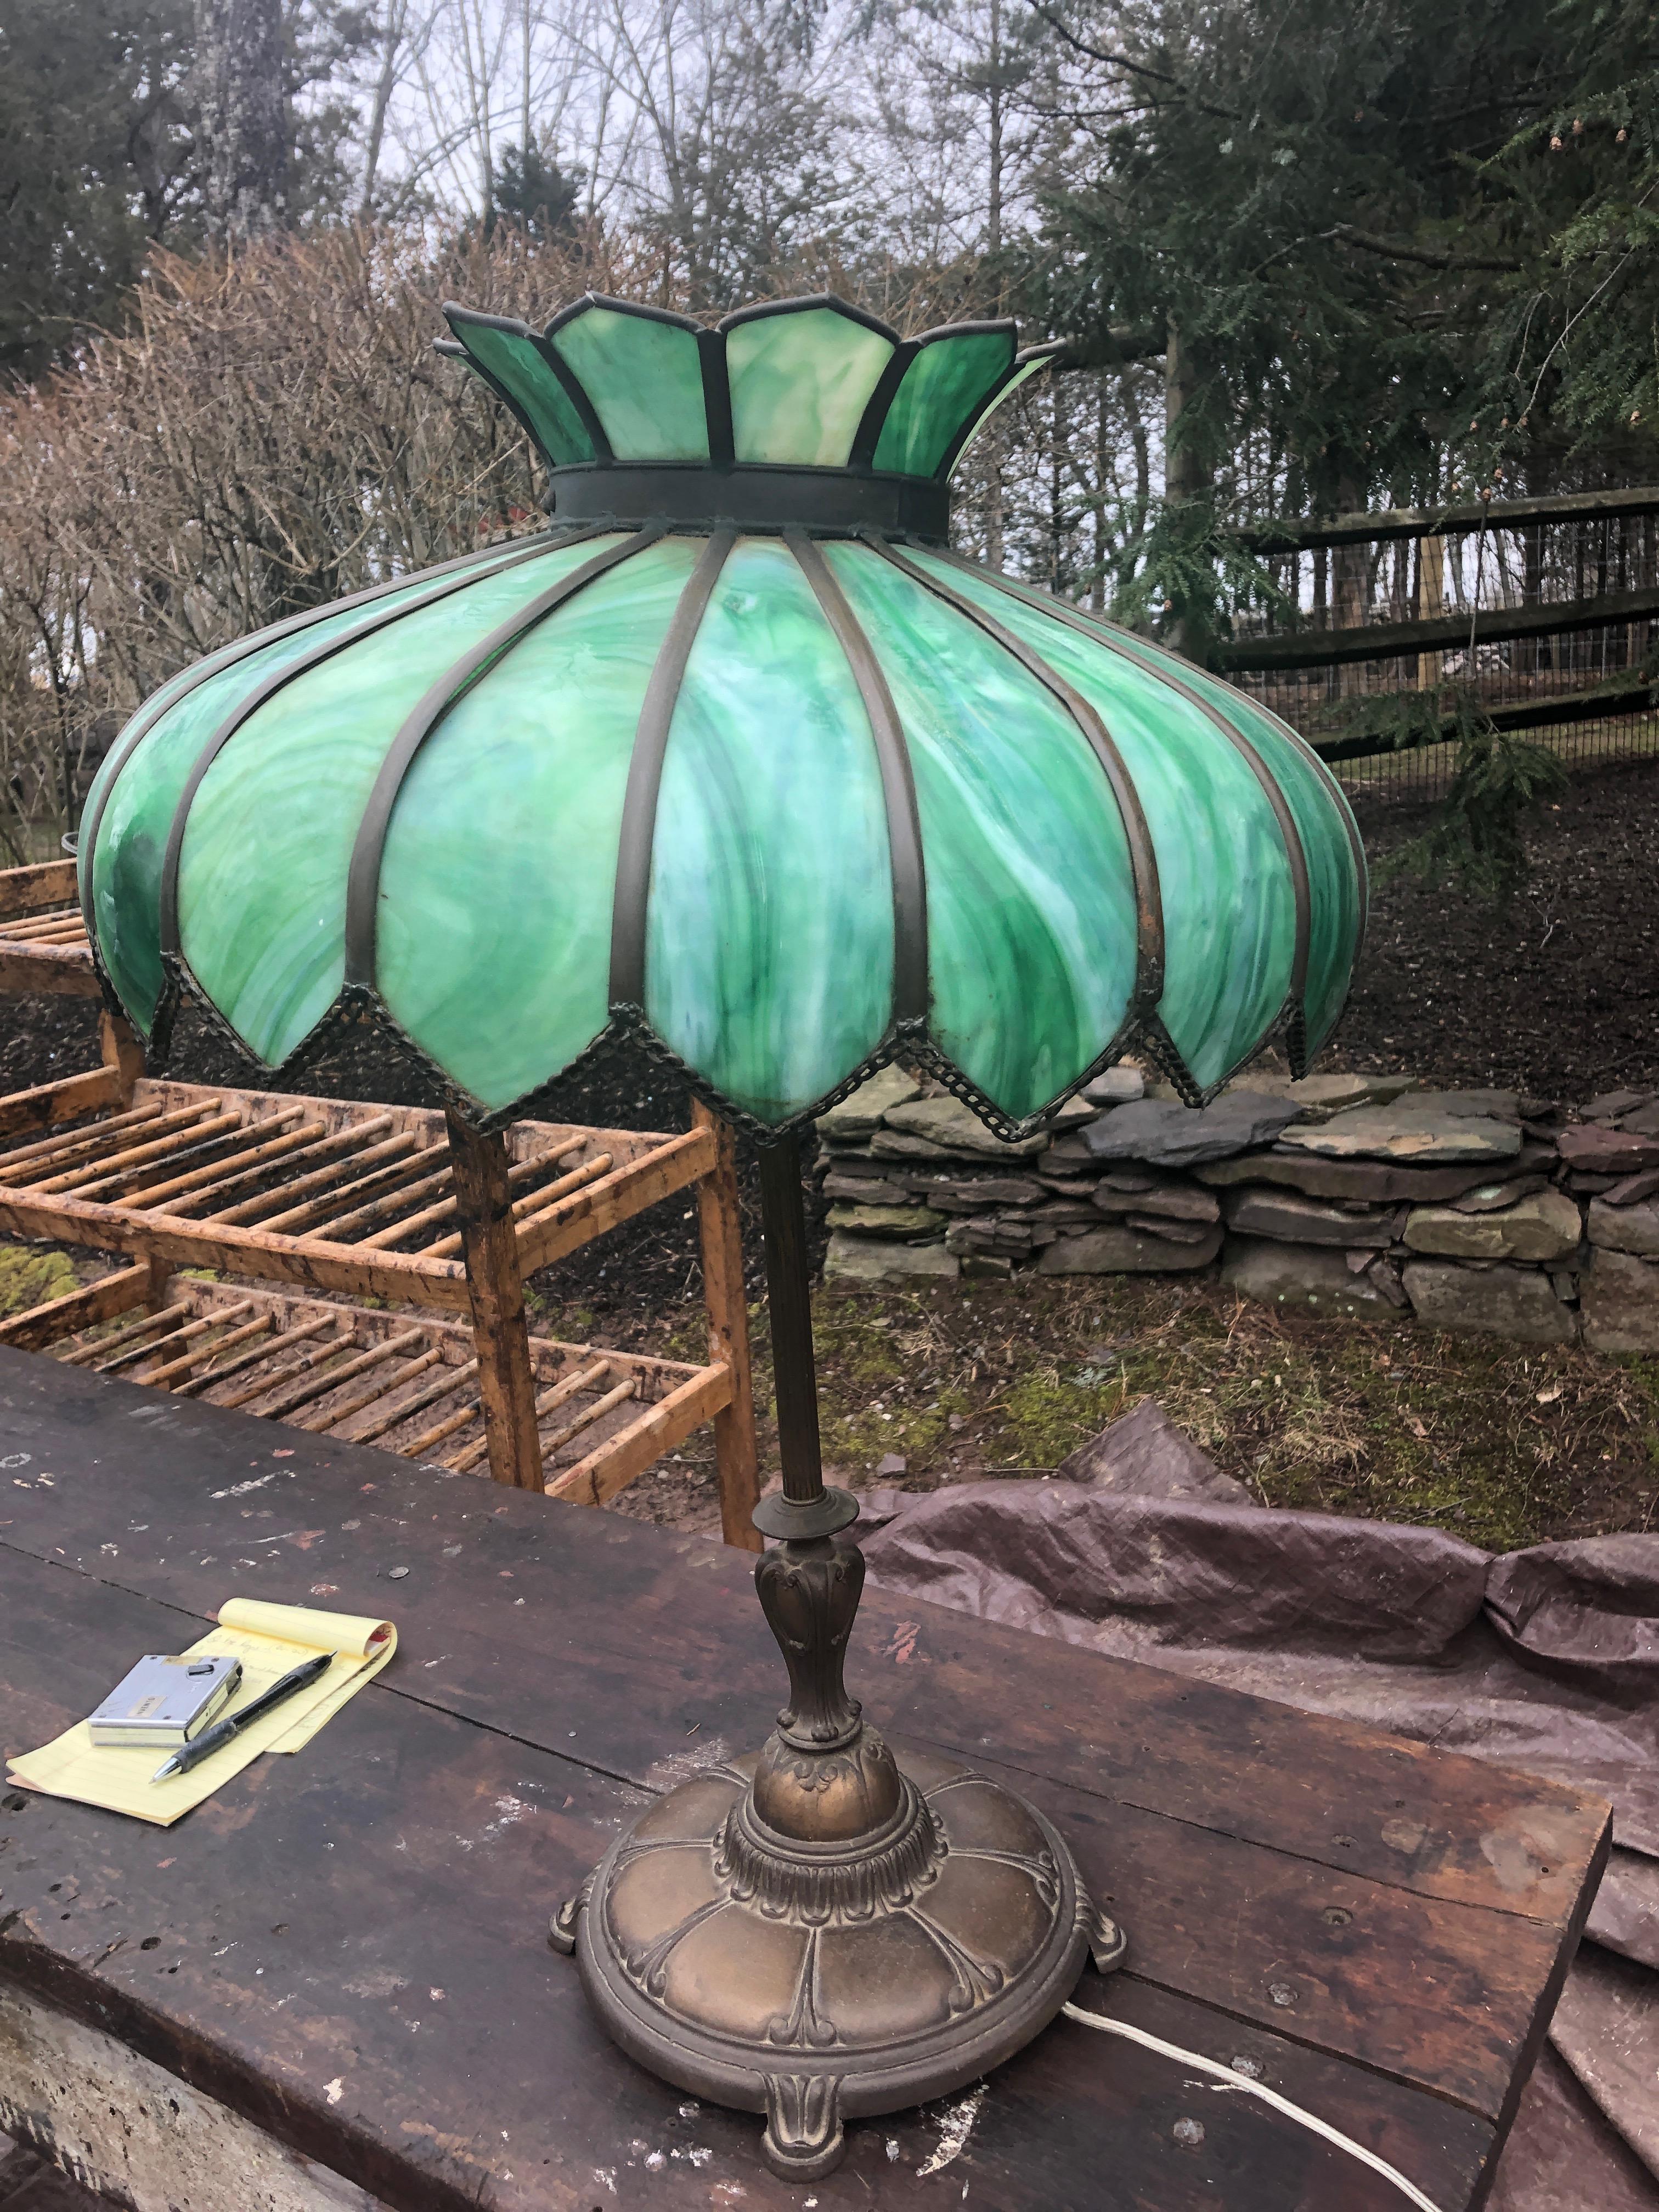 A very large antique leaded glass and brass table lamp having a luminous striking shade in various shades of green. Beautiful both unlit and illuminated.